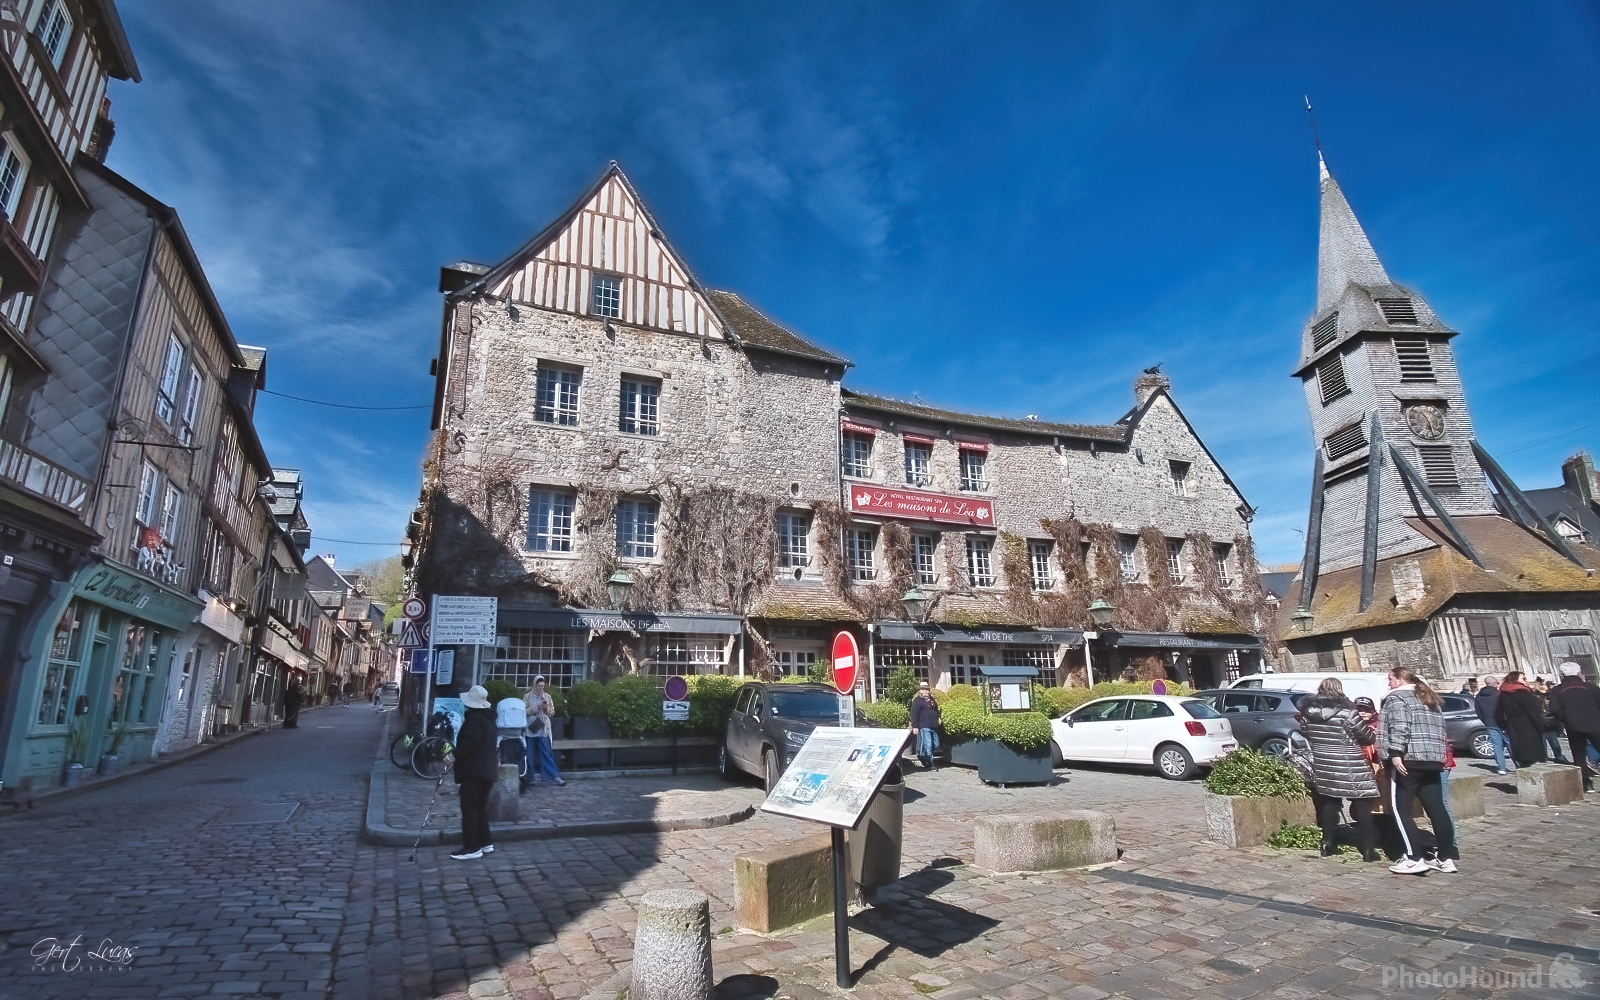 Image of Honfleur - St Catherines Square by Gert Lucas